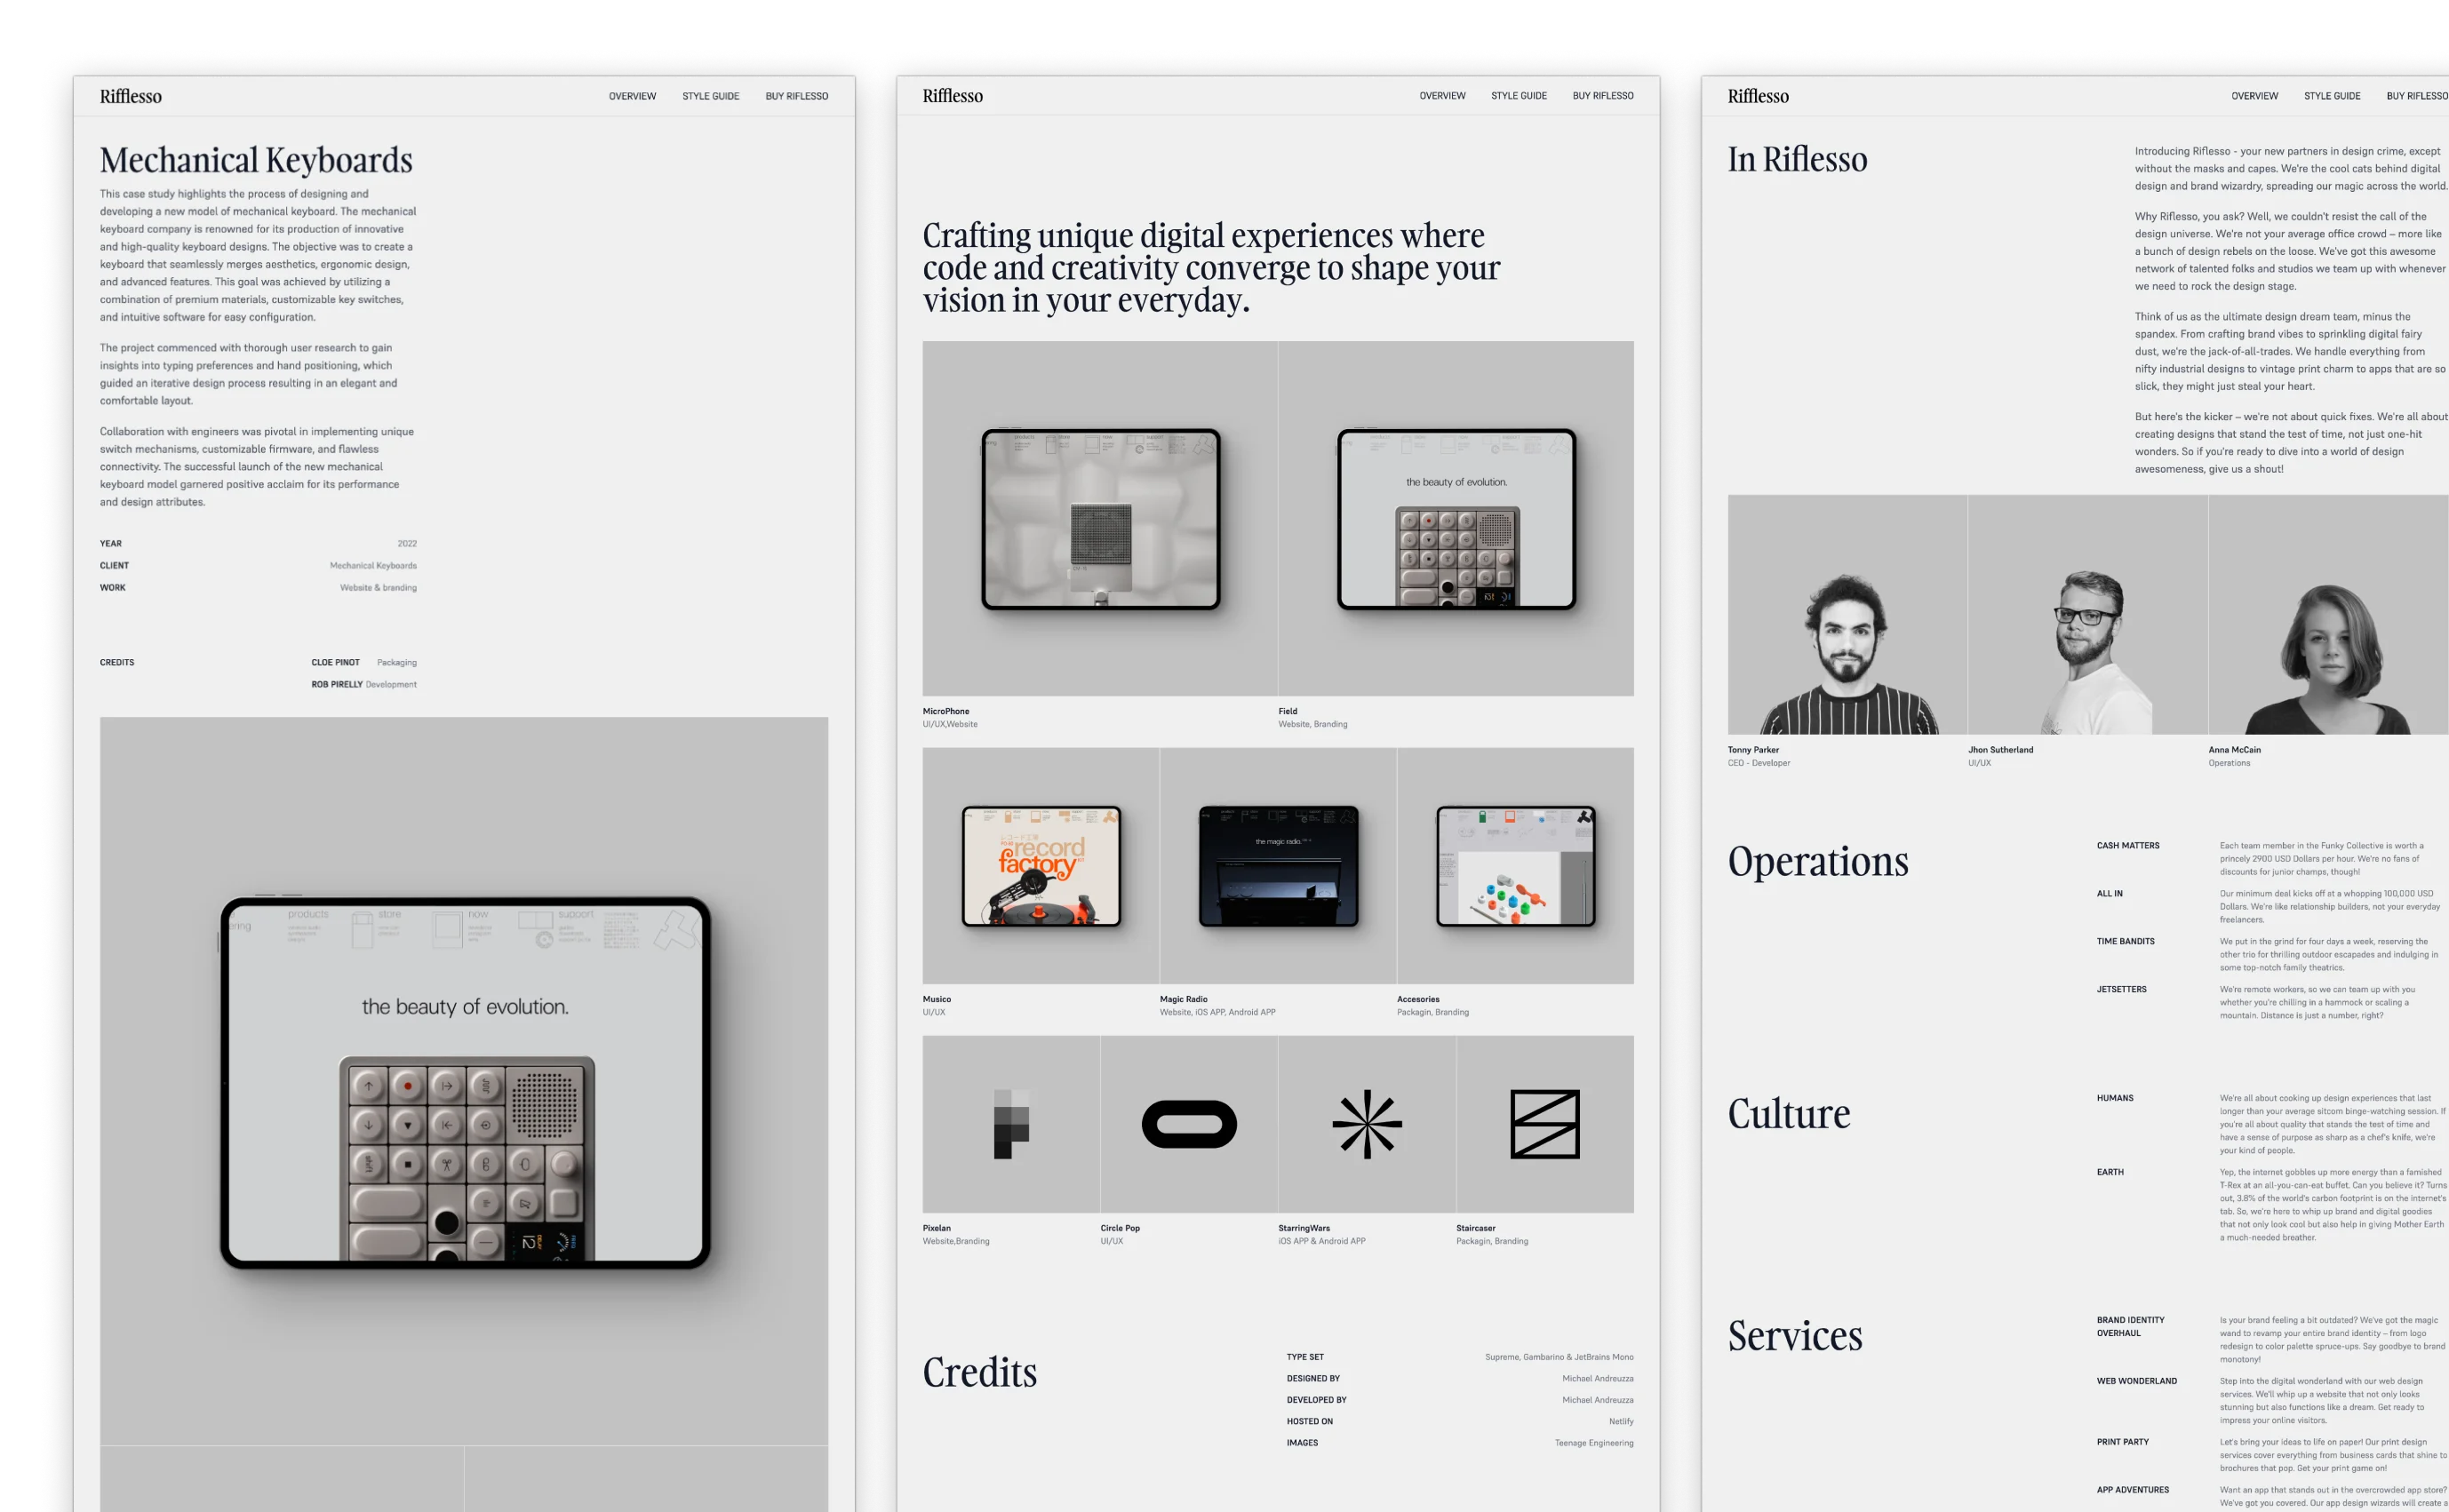 Riflesso theme presenting a professional portfolio, with a grayscale design showcasing mechanical keyboards, digital interfaces, and product designs. Includes detailed project descriptions, images of design work, and credits, along with profiles of design team members.